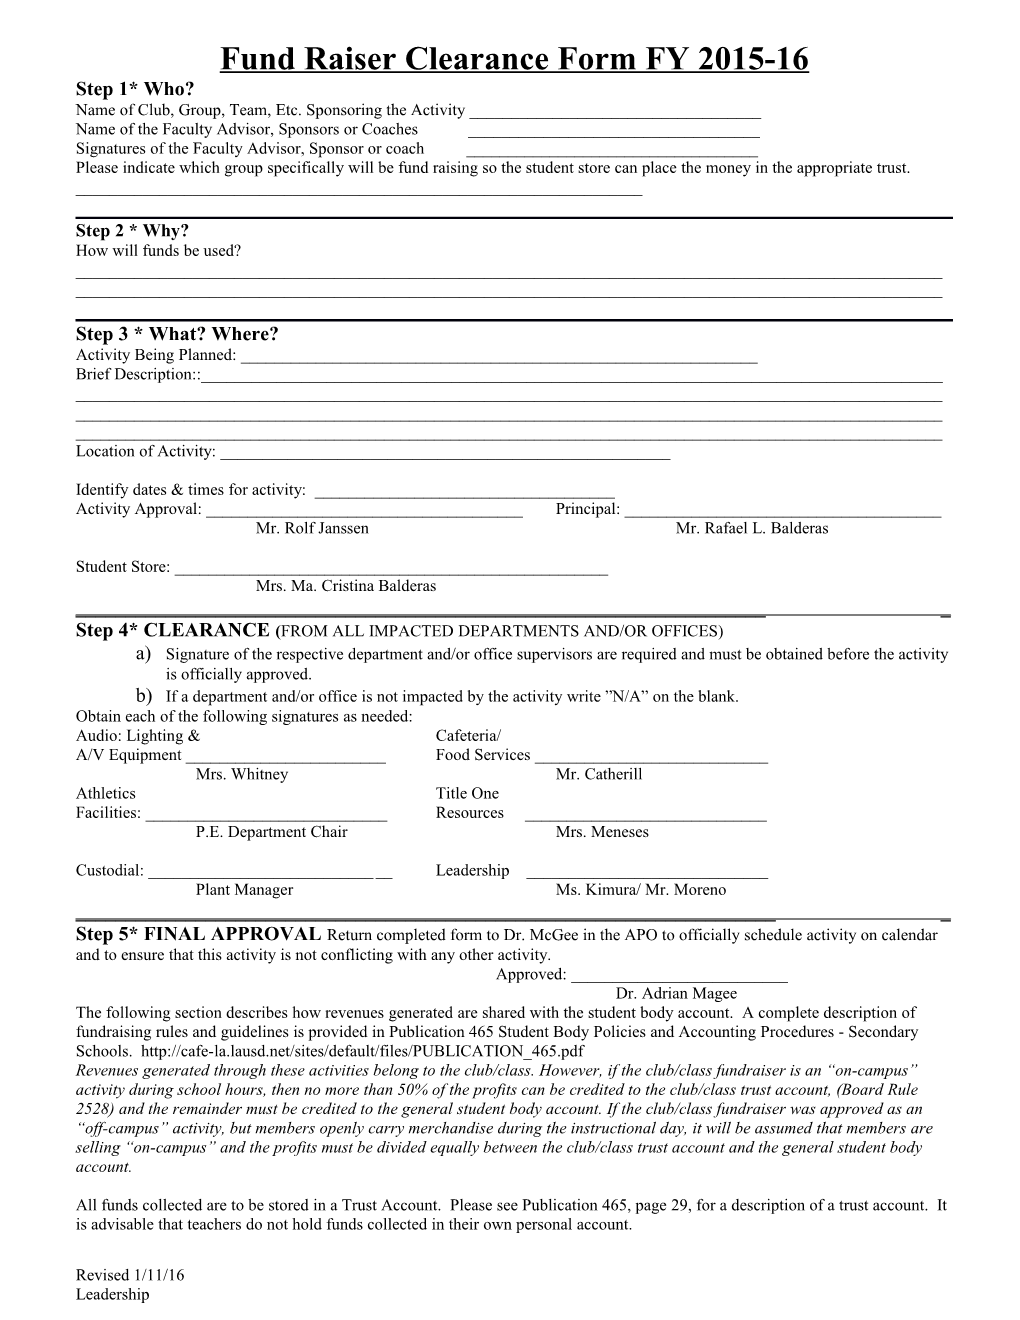 Bell High Activity Clearance Form